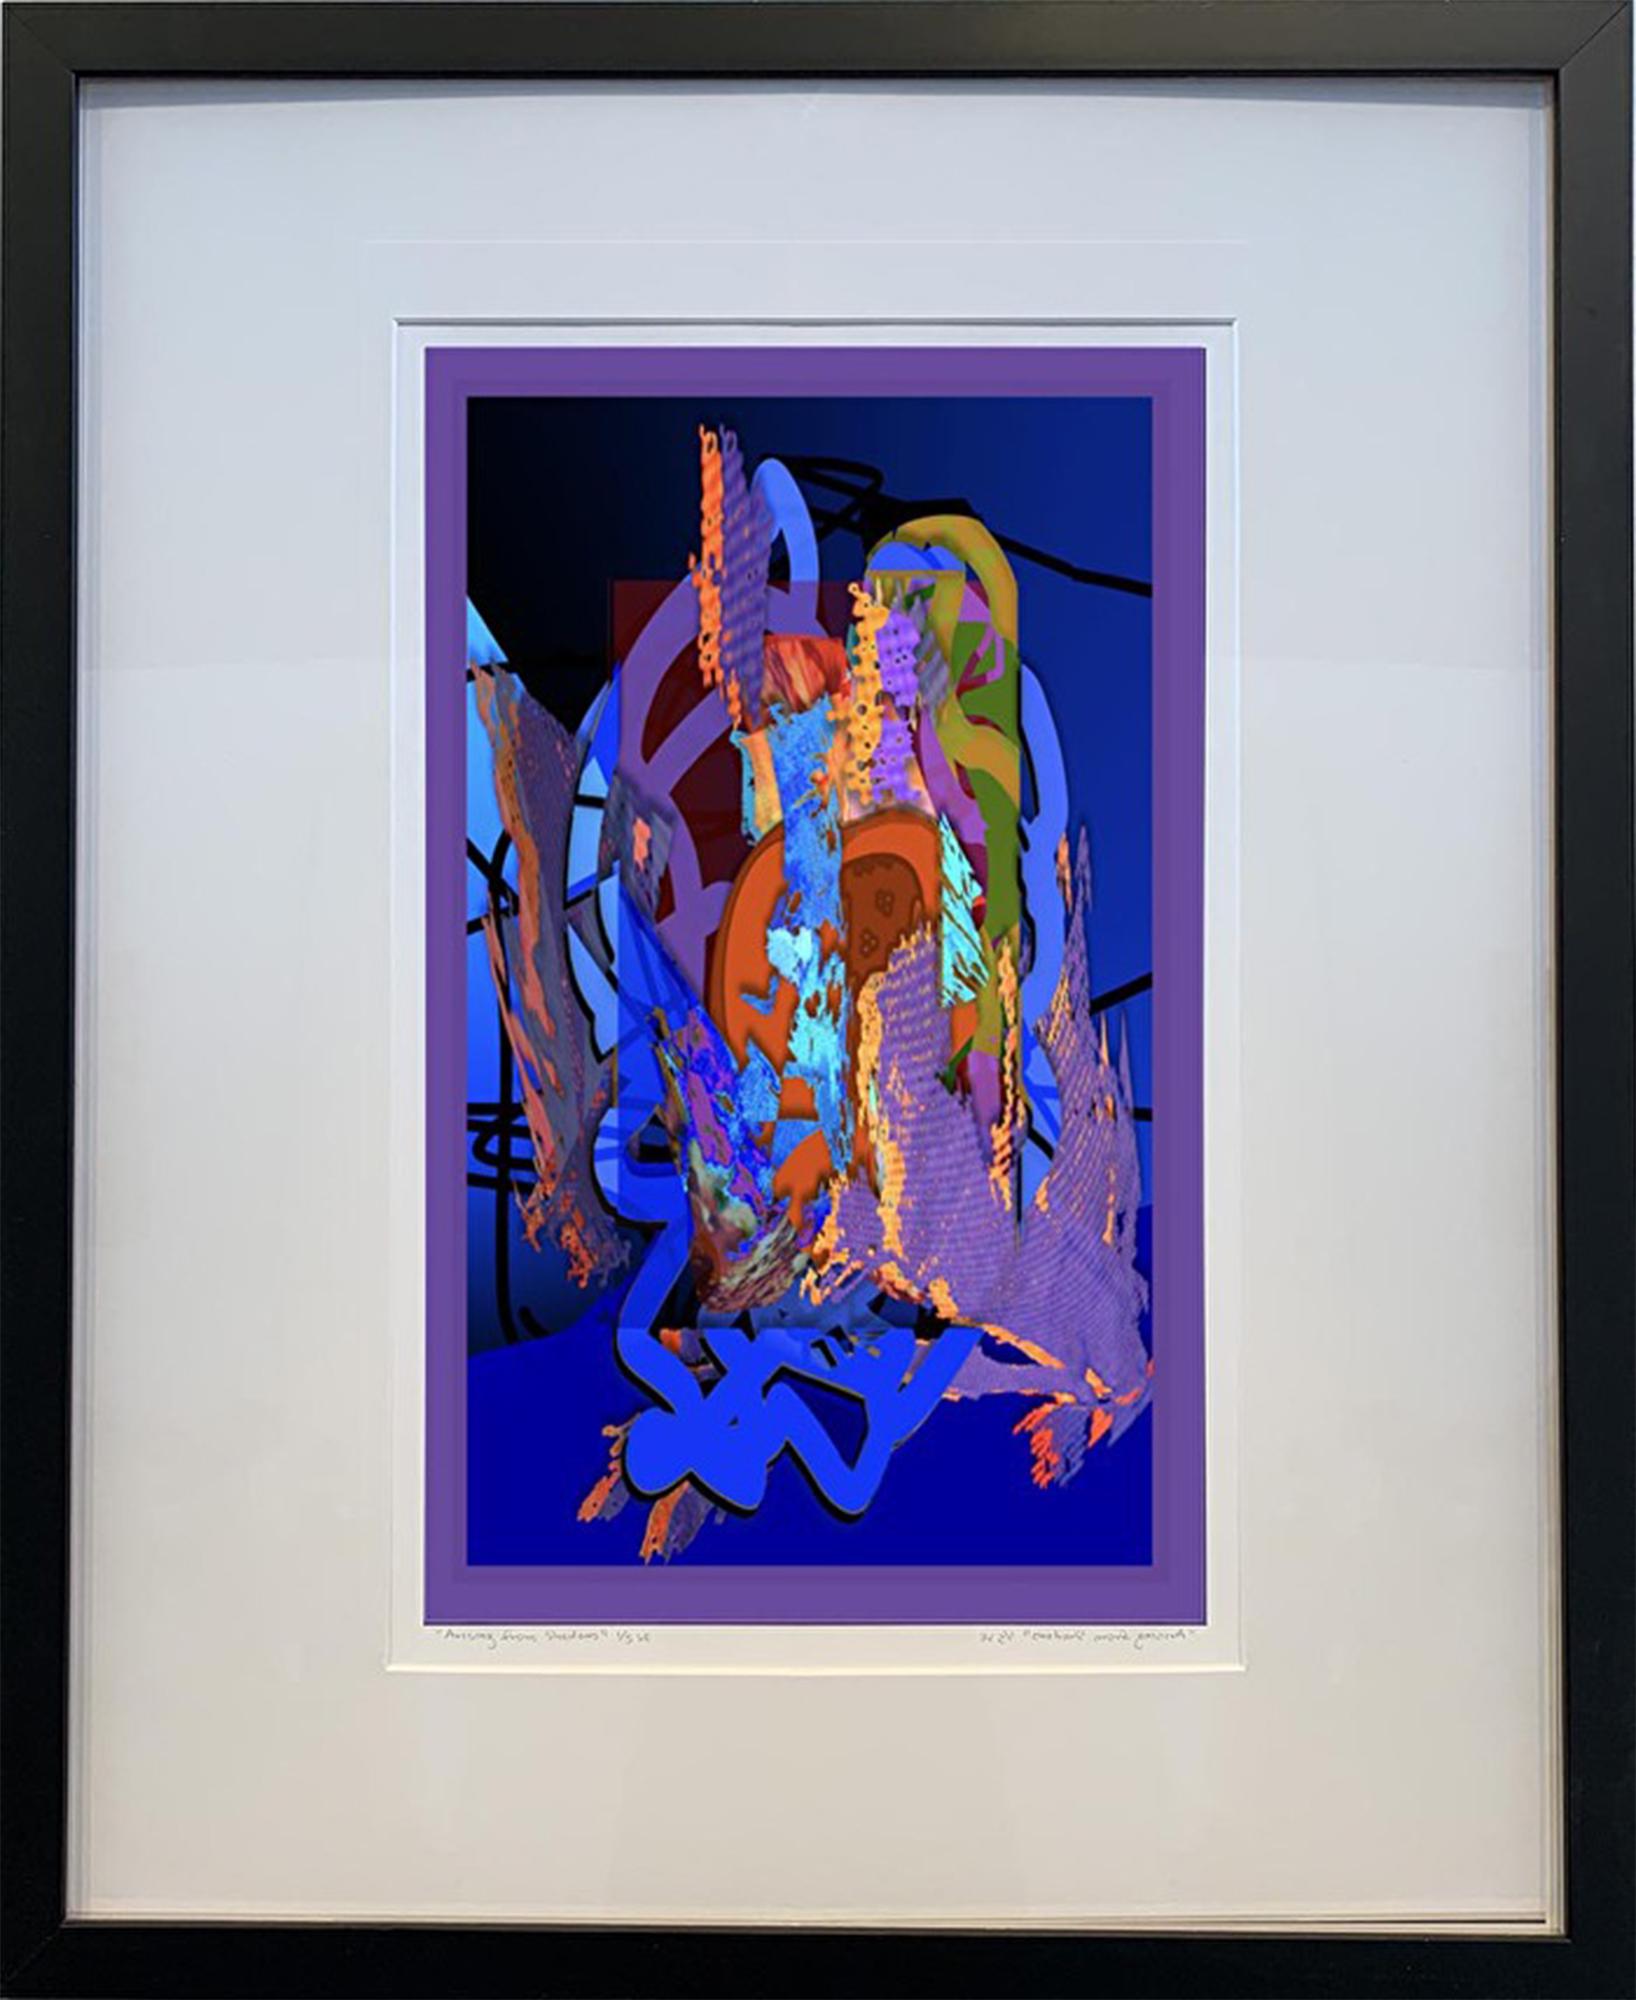 Arising from Shadows - Sydell Lewis - Digital Pigment Prints For Sale 2